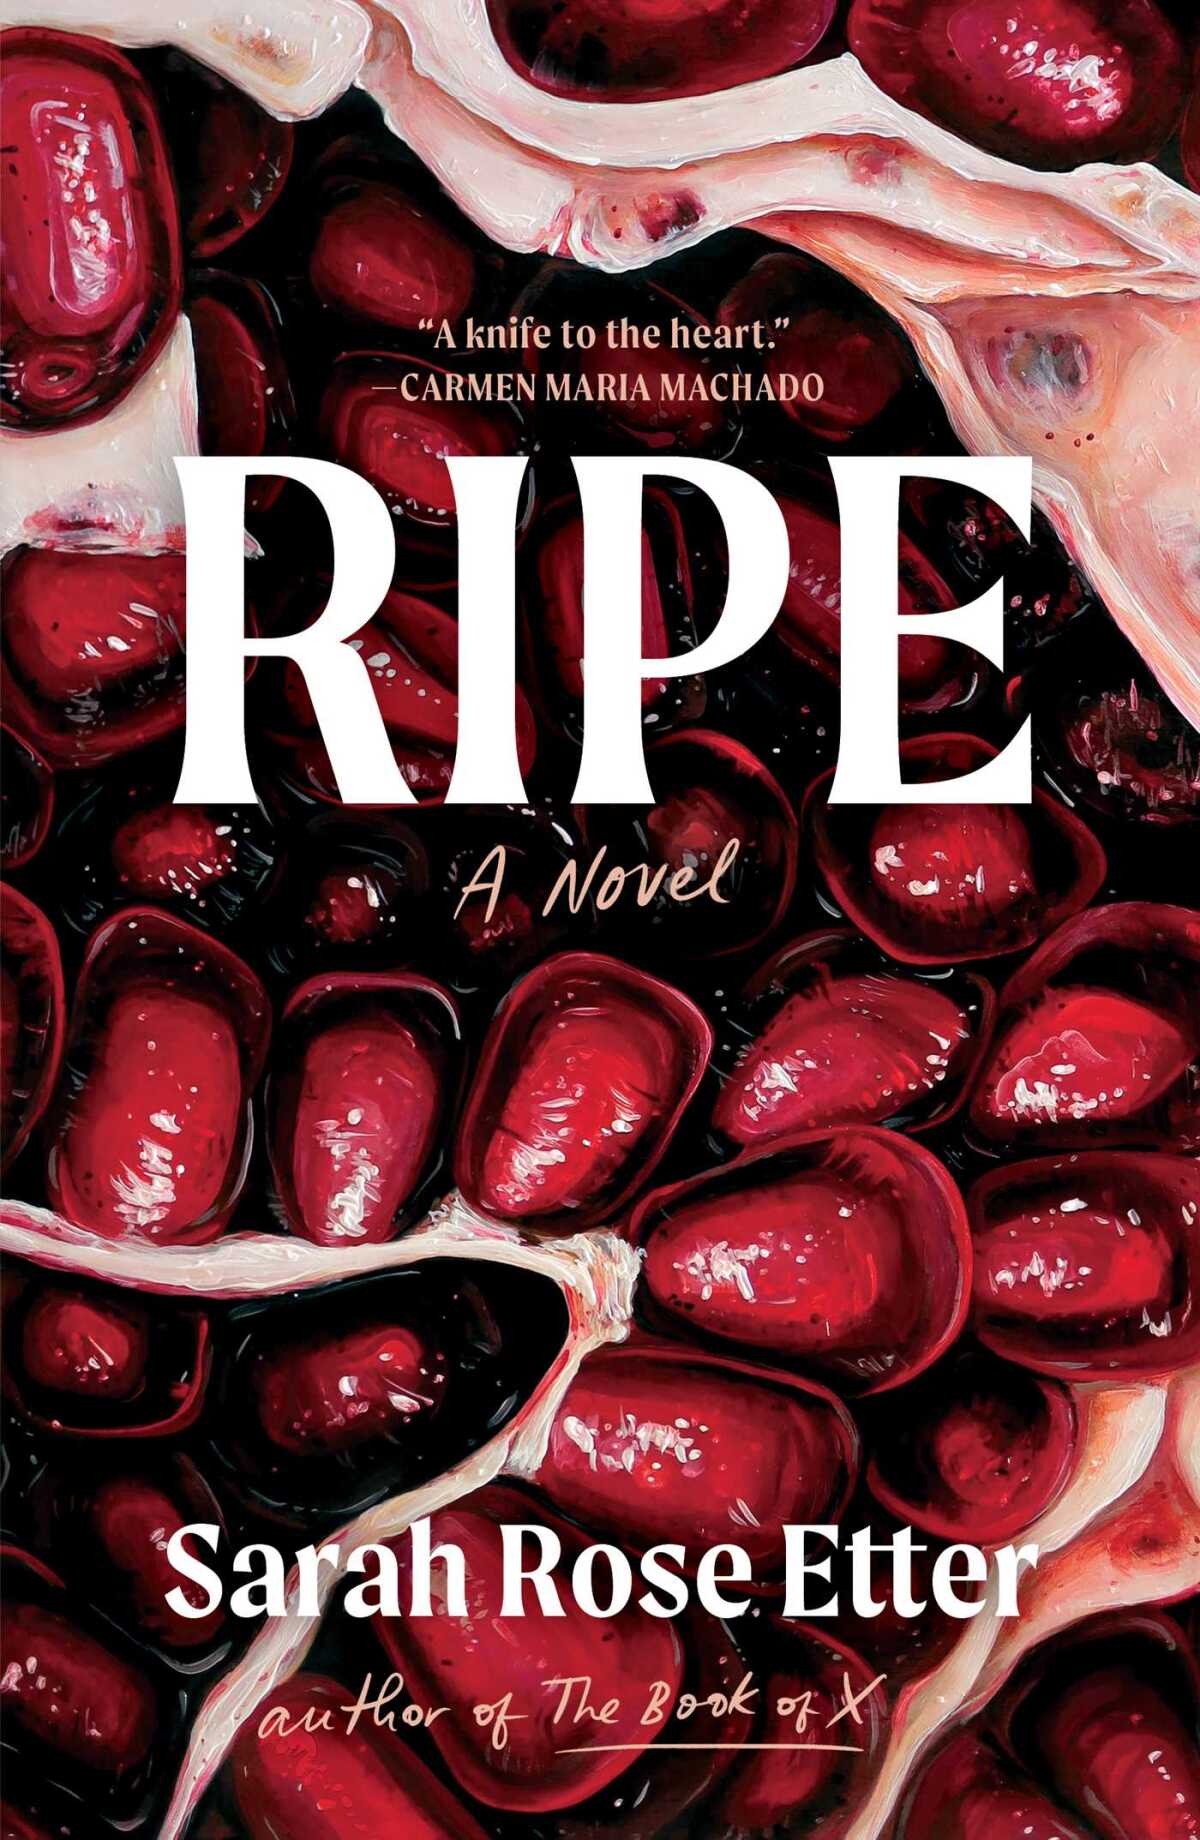 book cover for 'Ripe,' by Sarah Rose Etter has pomegranate seeds 